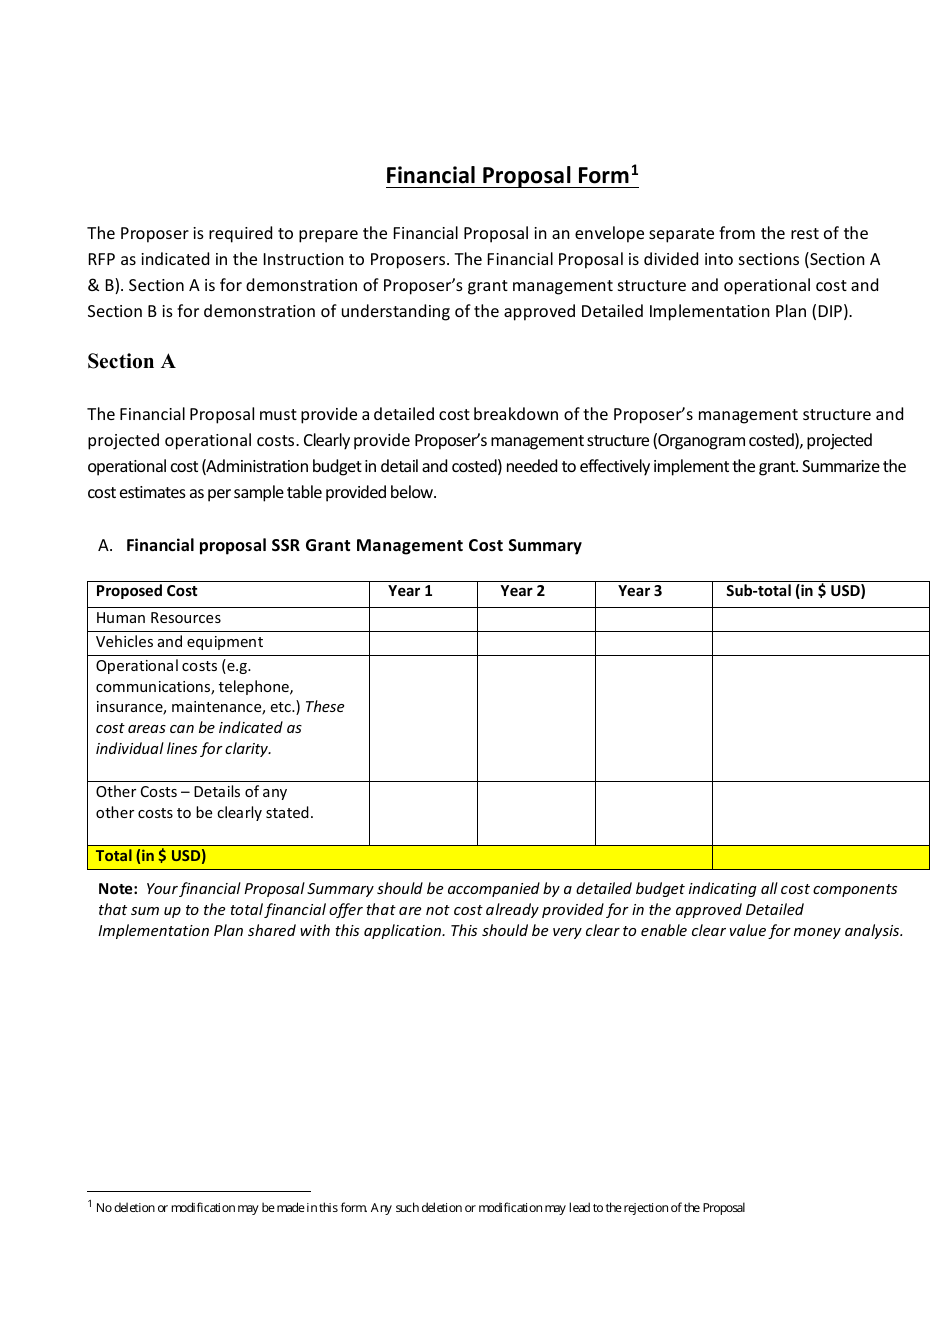 financial-proposal-form-fill-out-sign-online-and-download-pdf